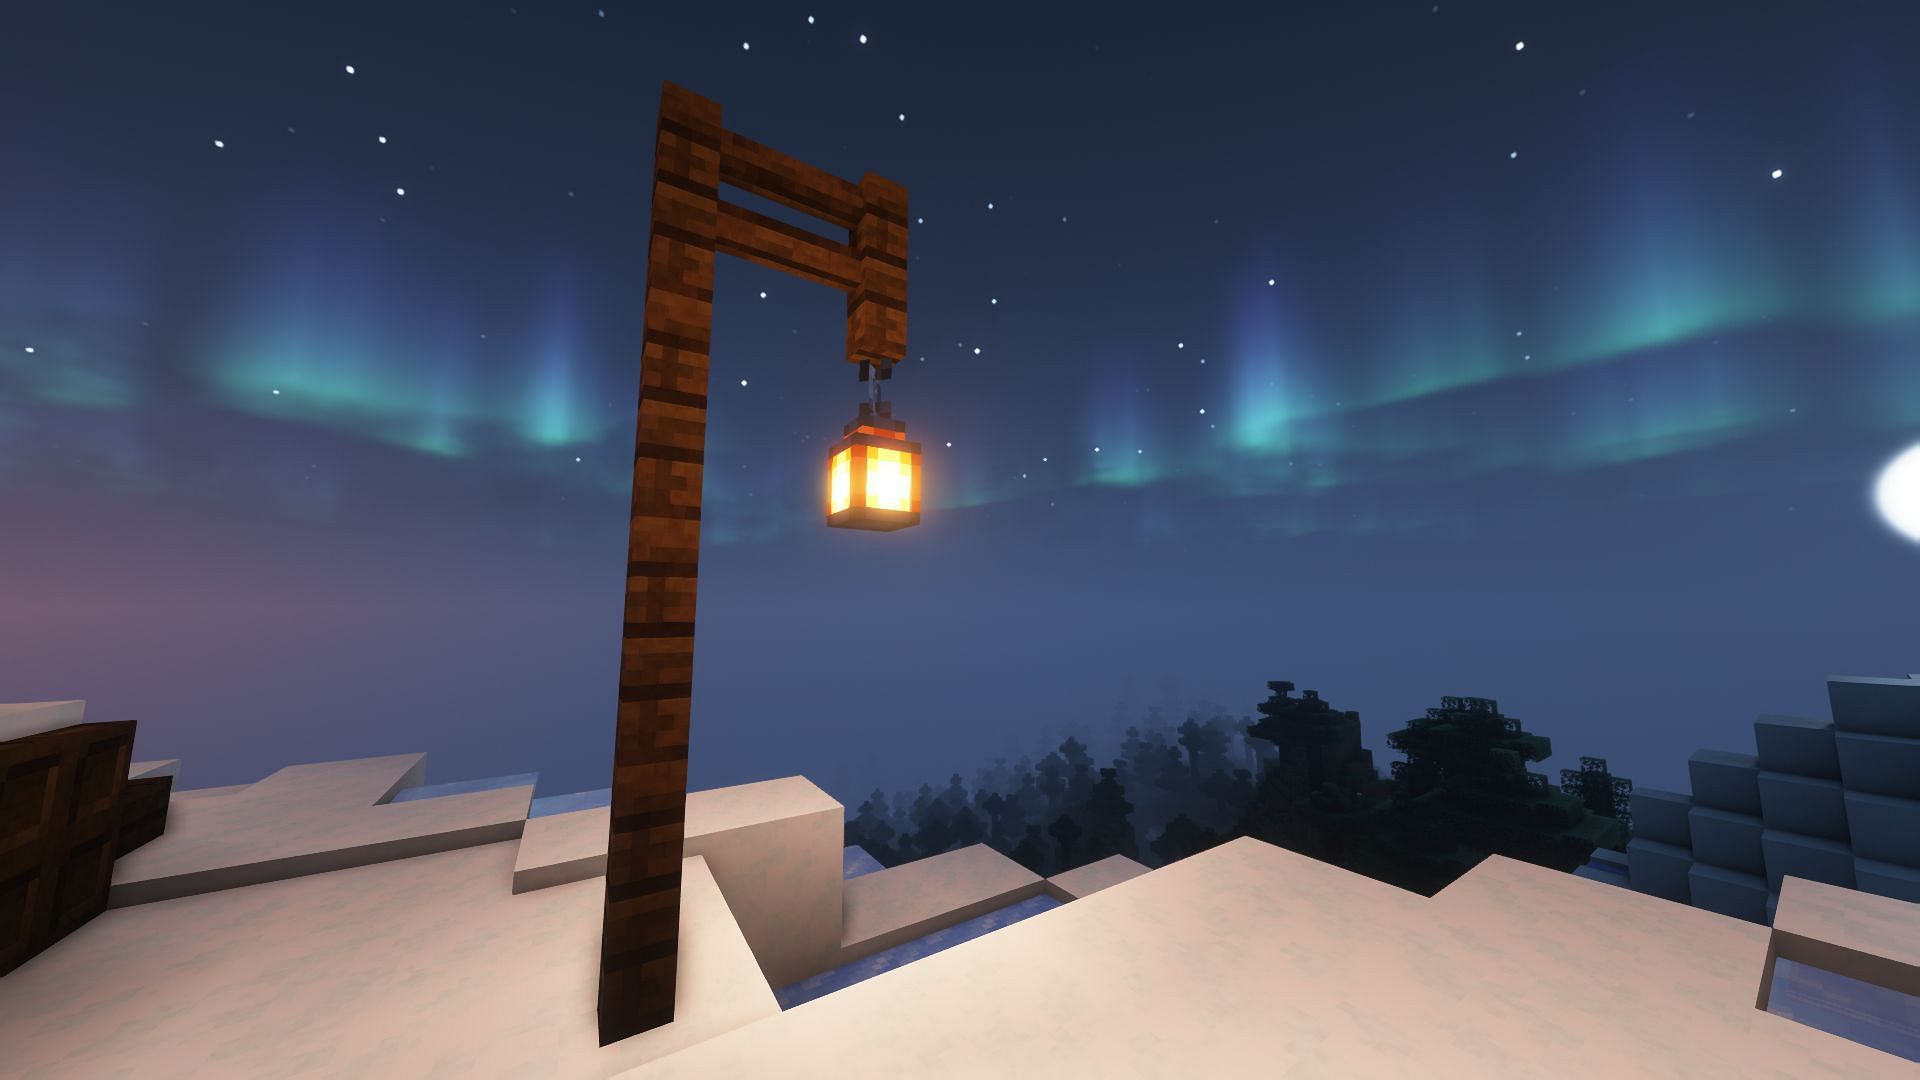 Street lamps are extremely easy to build in Minecraft (Image via Mojang)